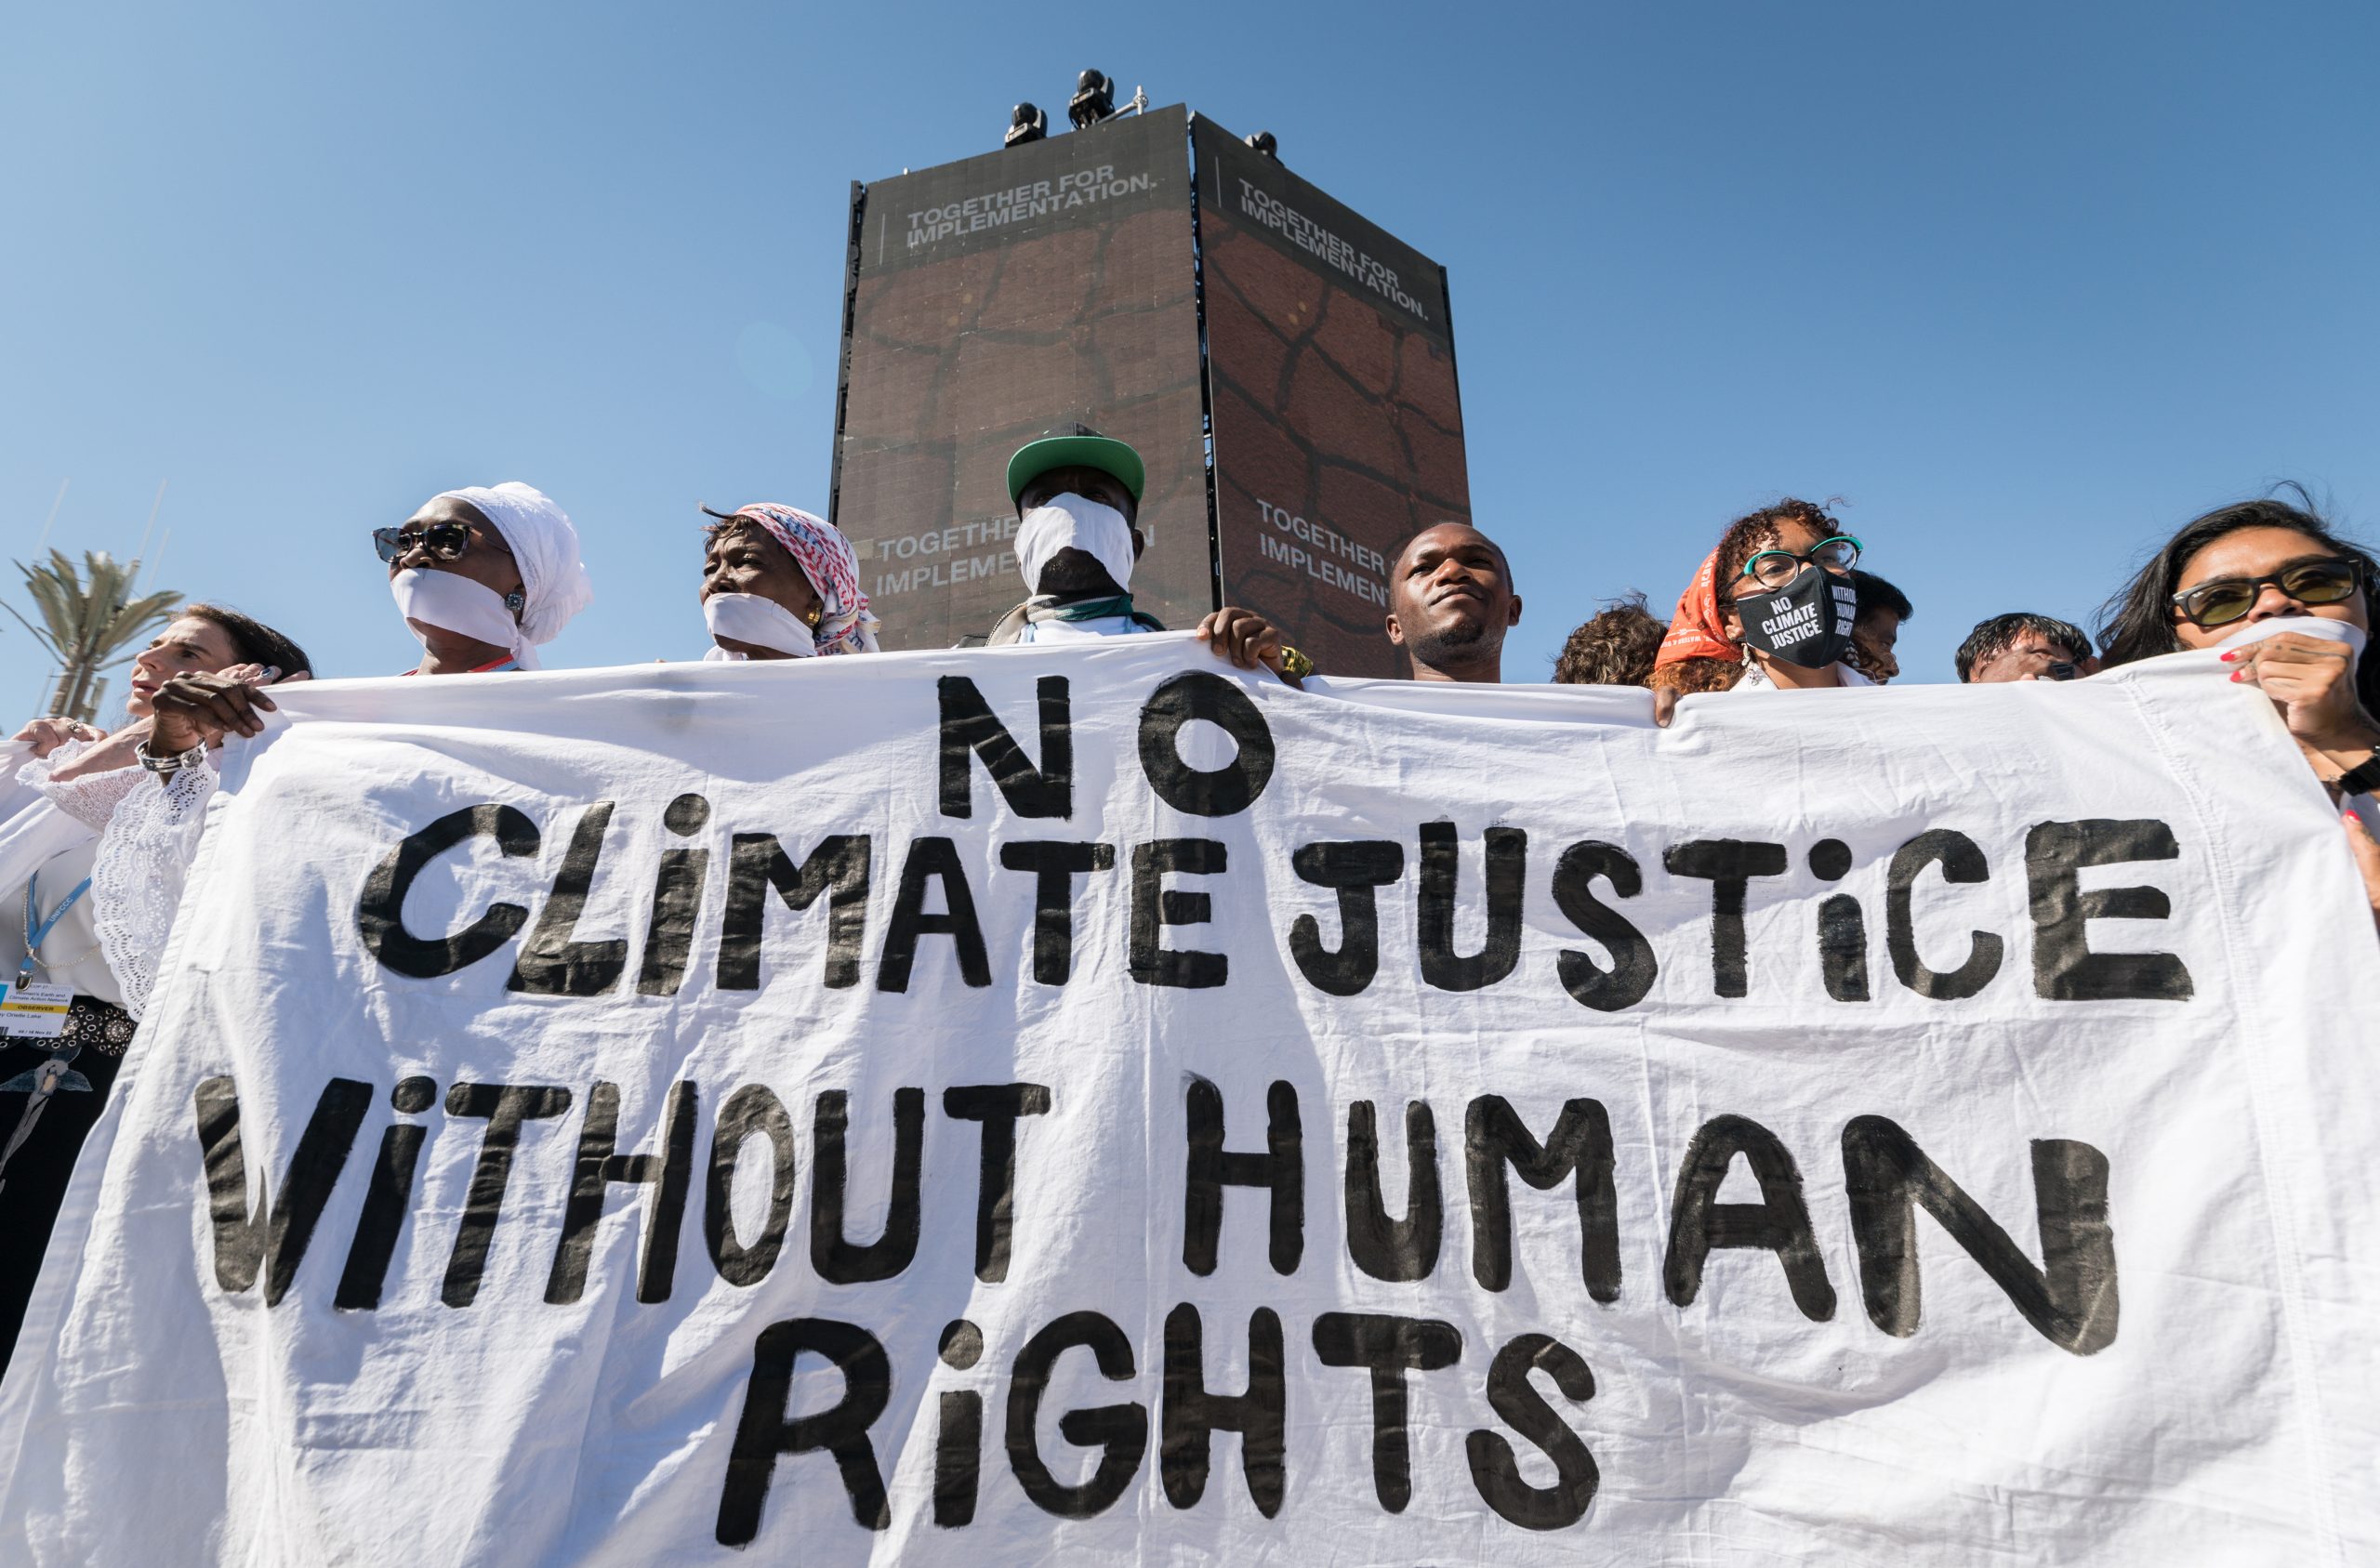 A group holding a banner reading 'No Climate Justice without Human Rights'. The group is pictured in front of a large pillar with the COP27 slogan 'Together for Implementation' on display.